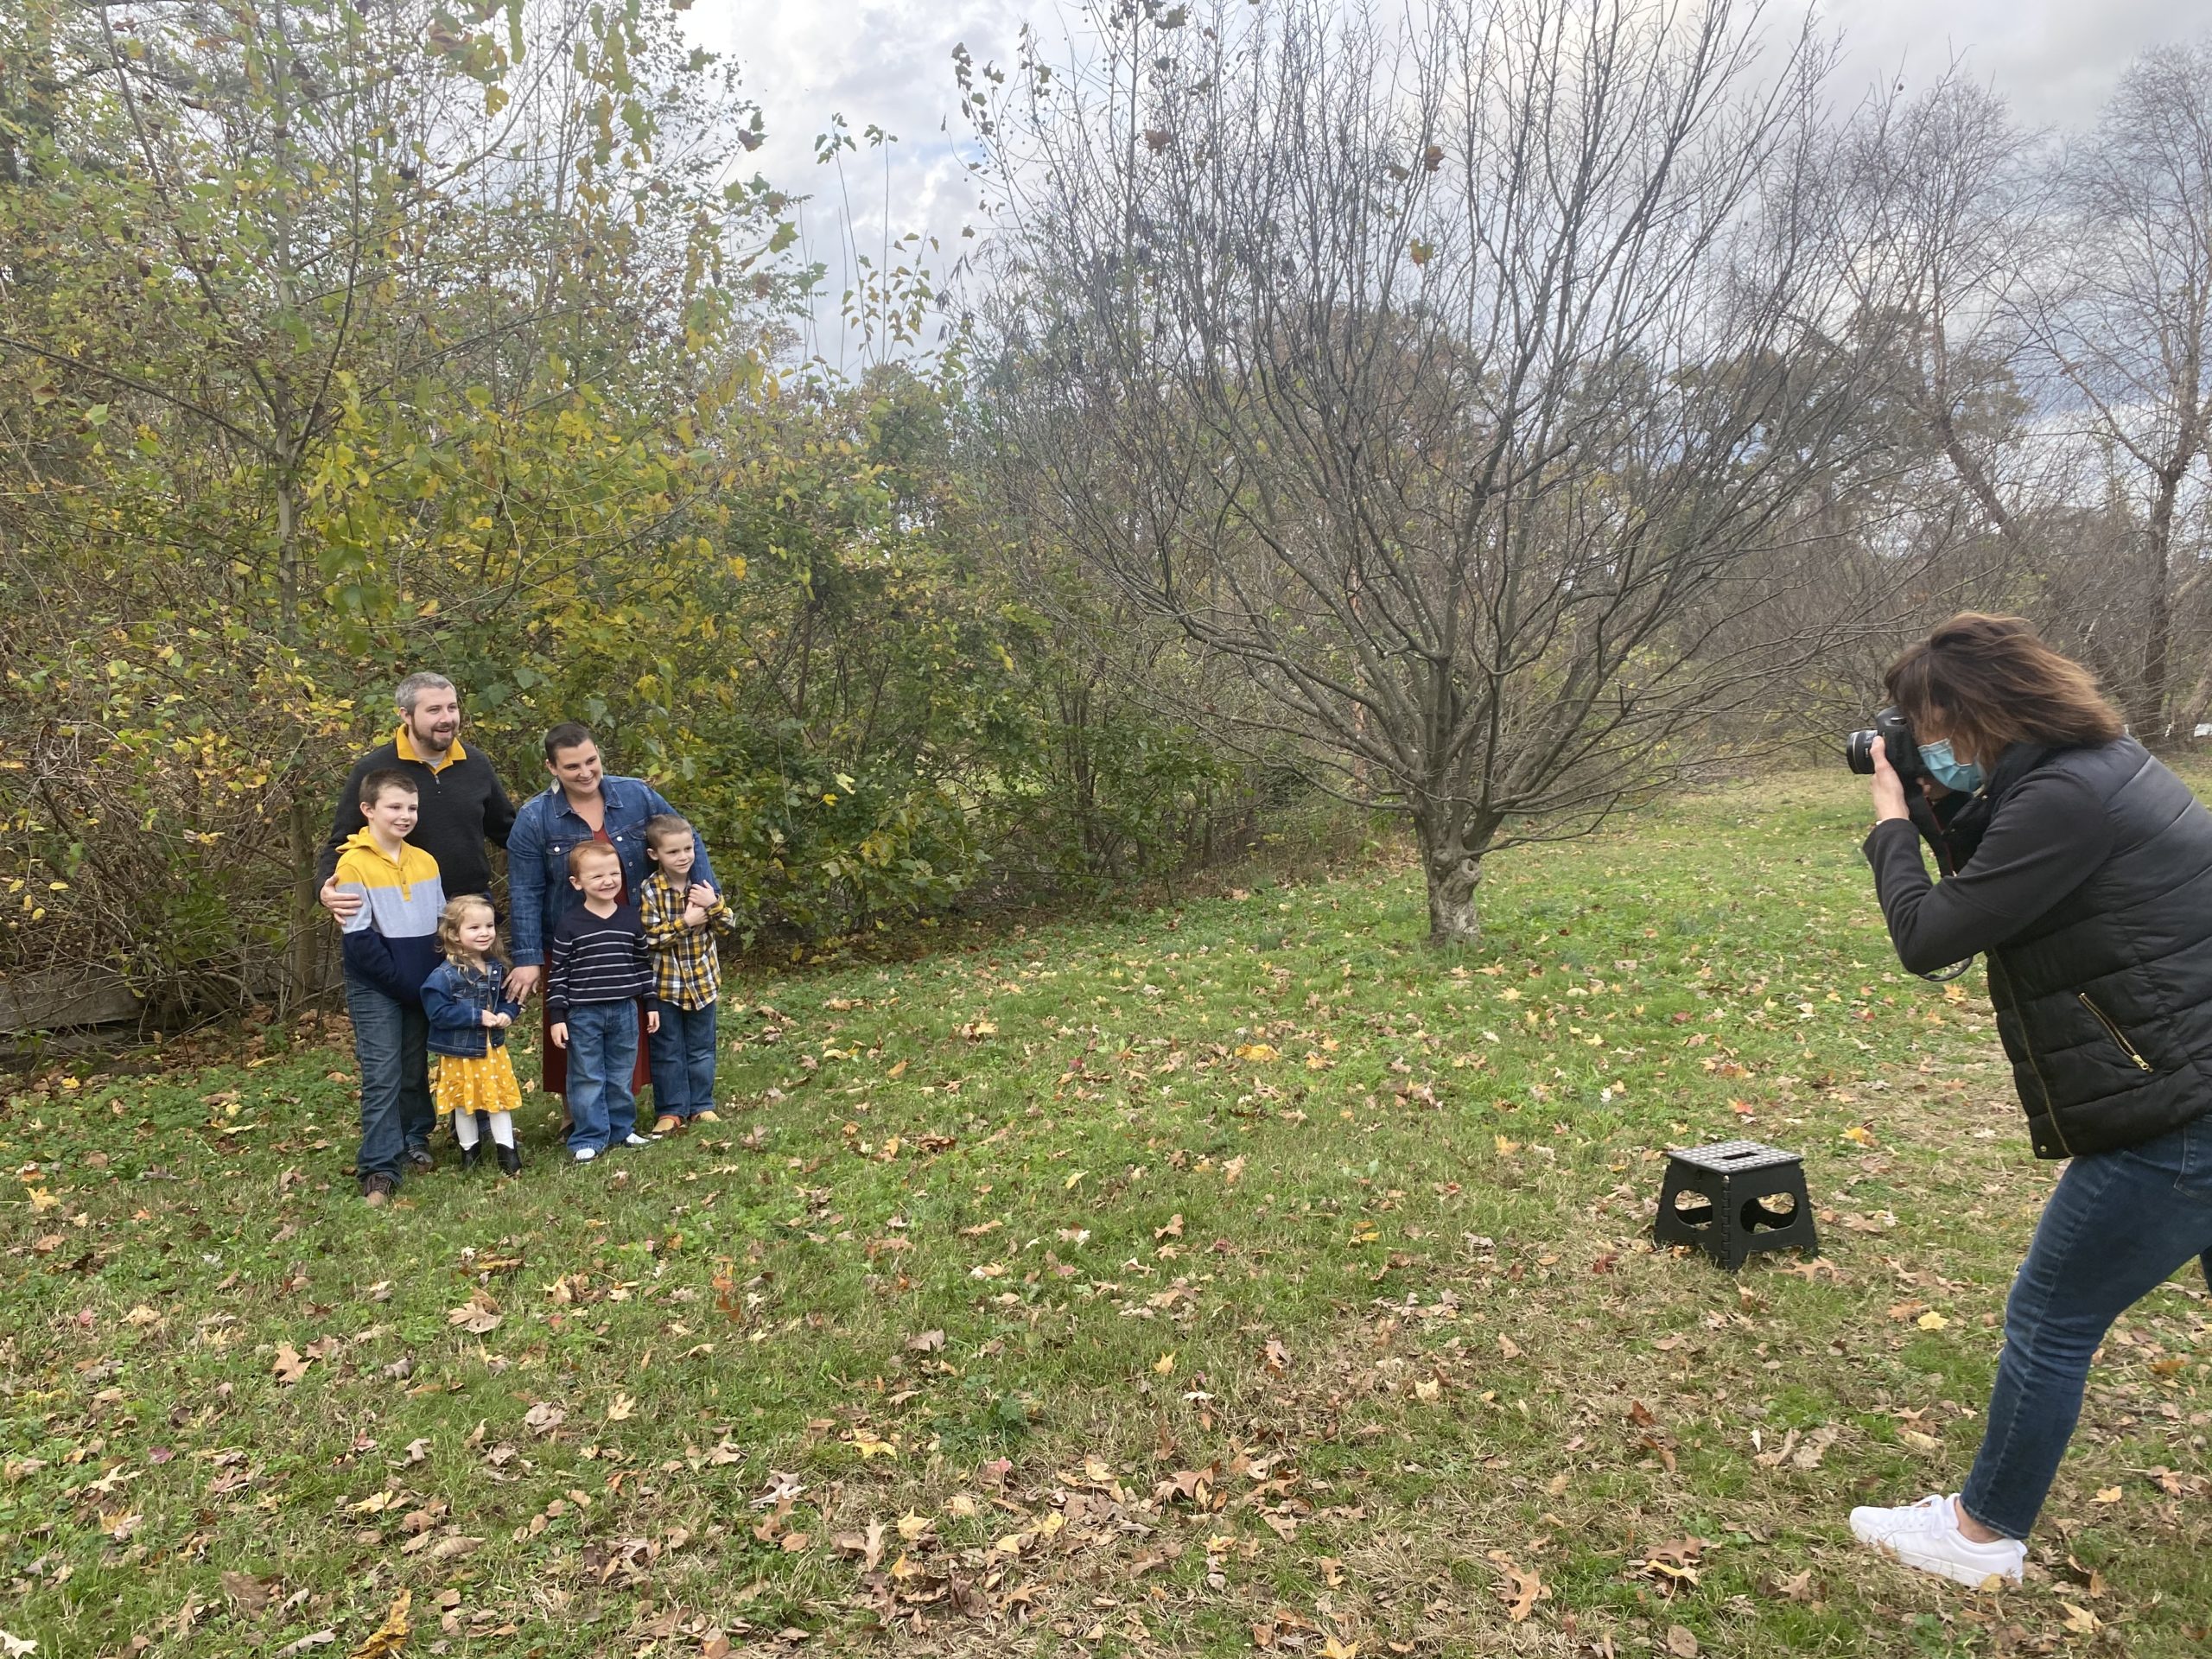 Photographer taking a photo of a family in a park